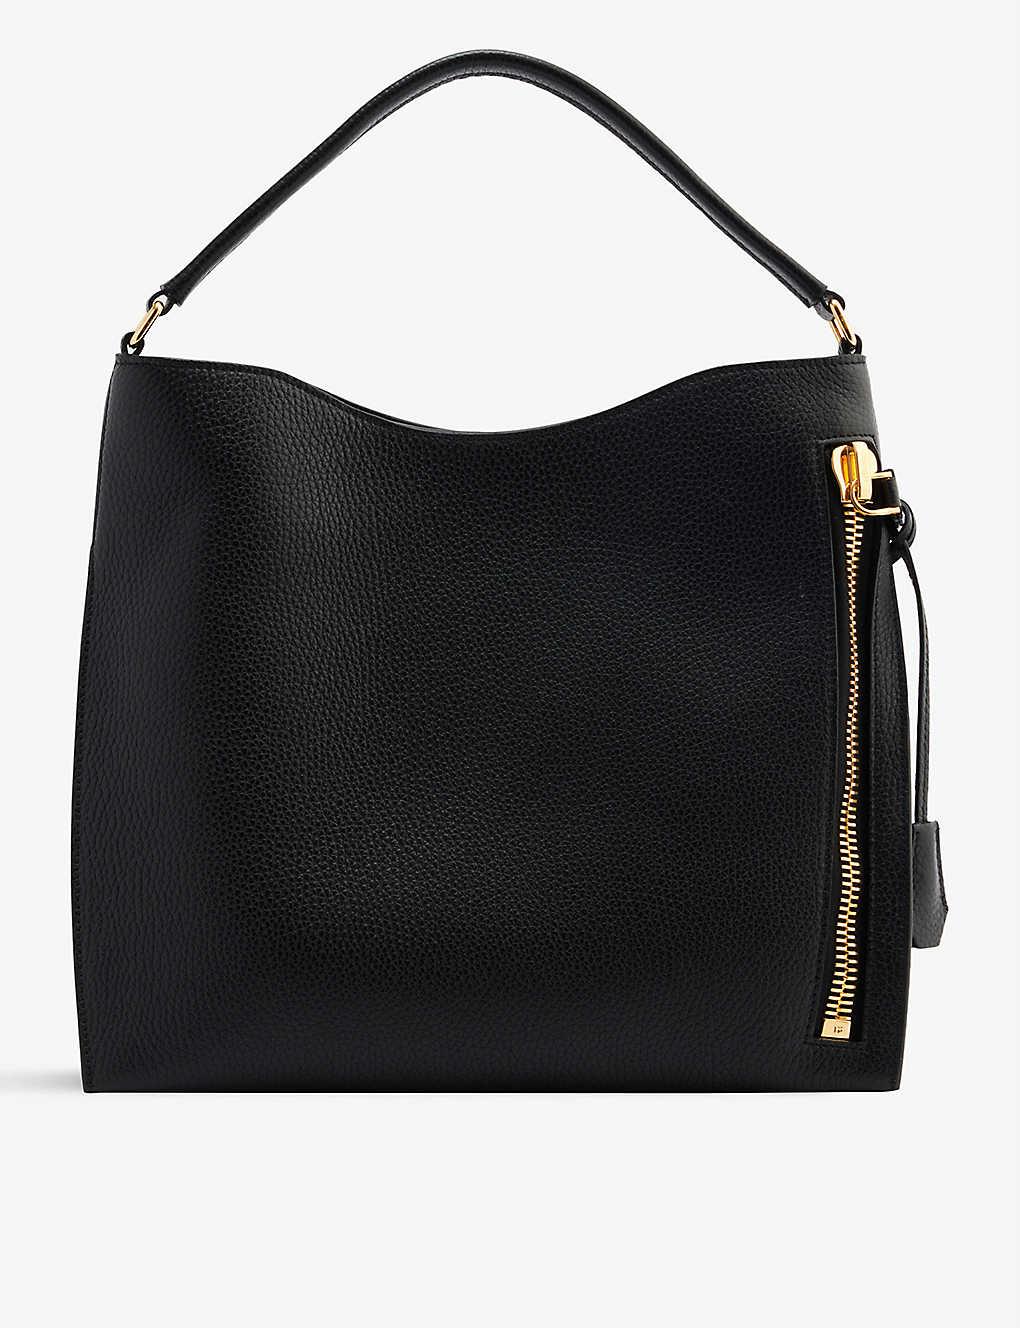 Tom Ford Alix Small Leather Tote Bag in Black | Lyst